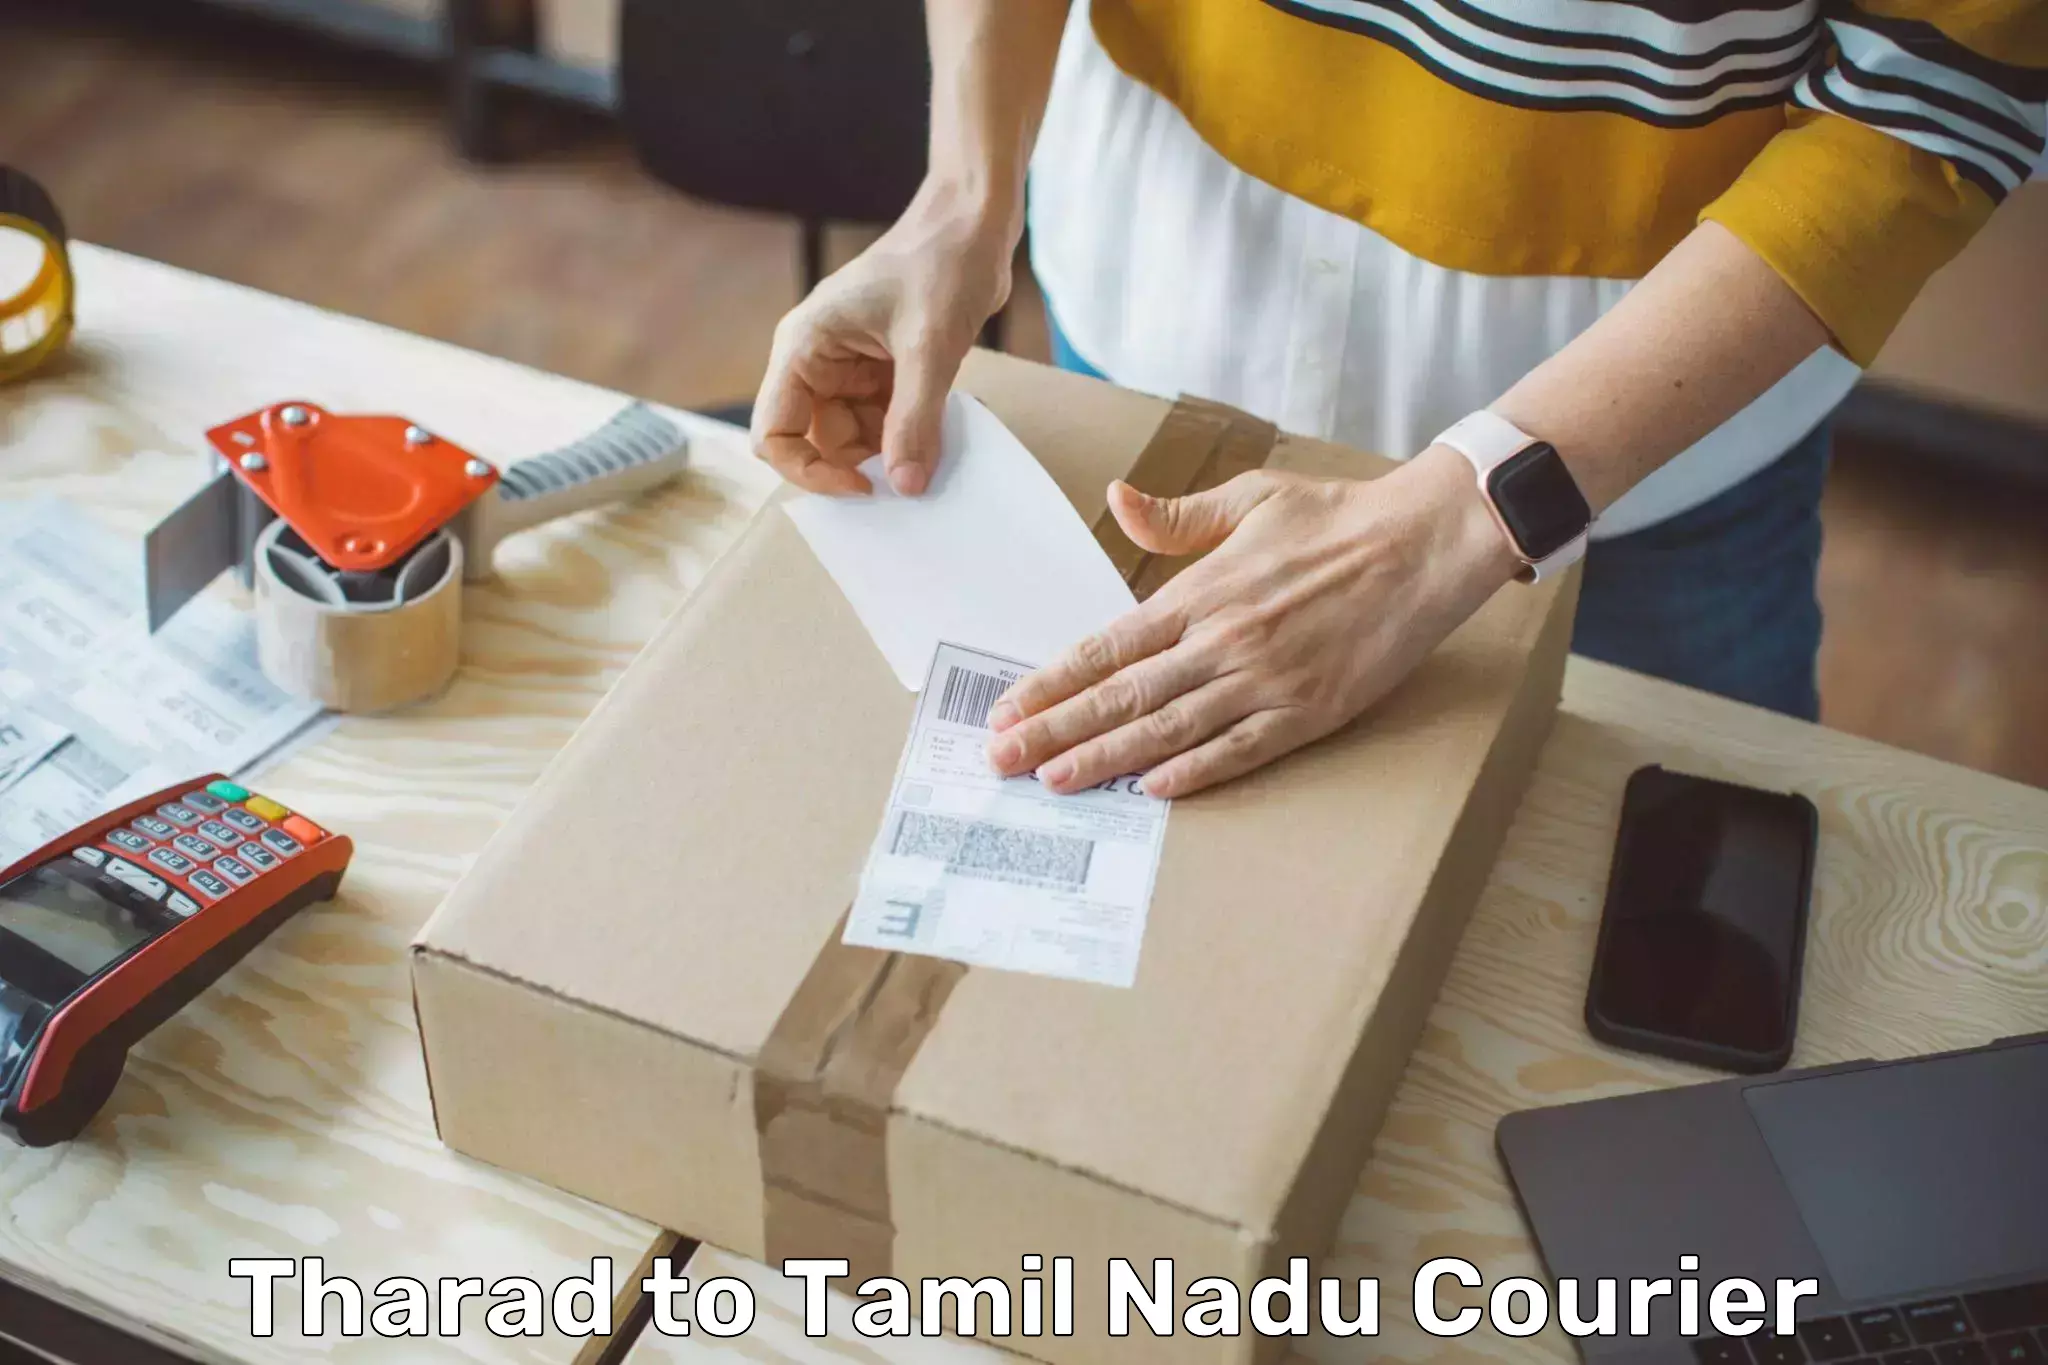 Customer-focused courier Tharad to Ambattur